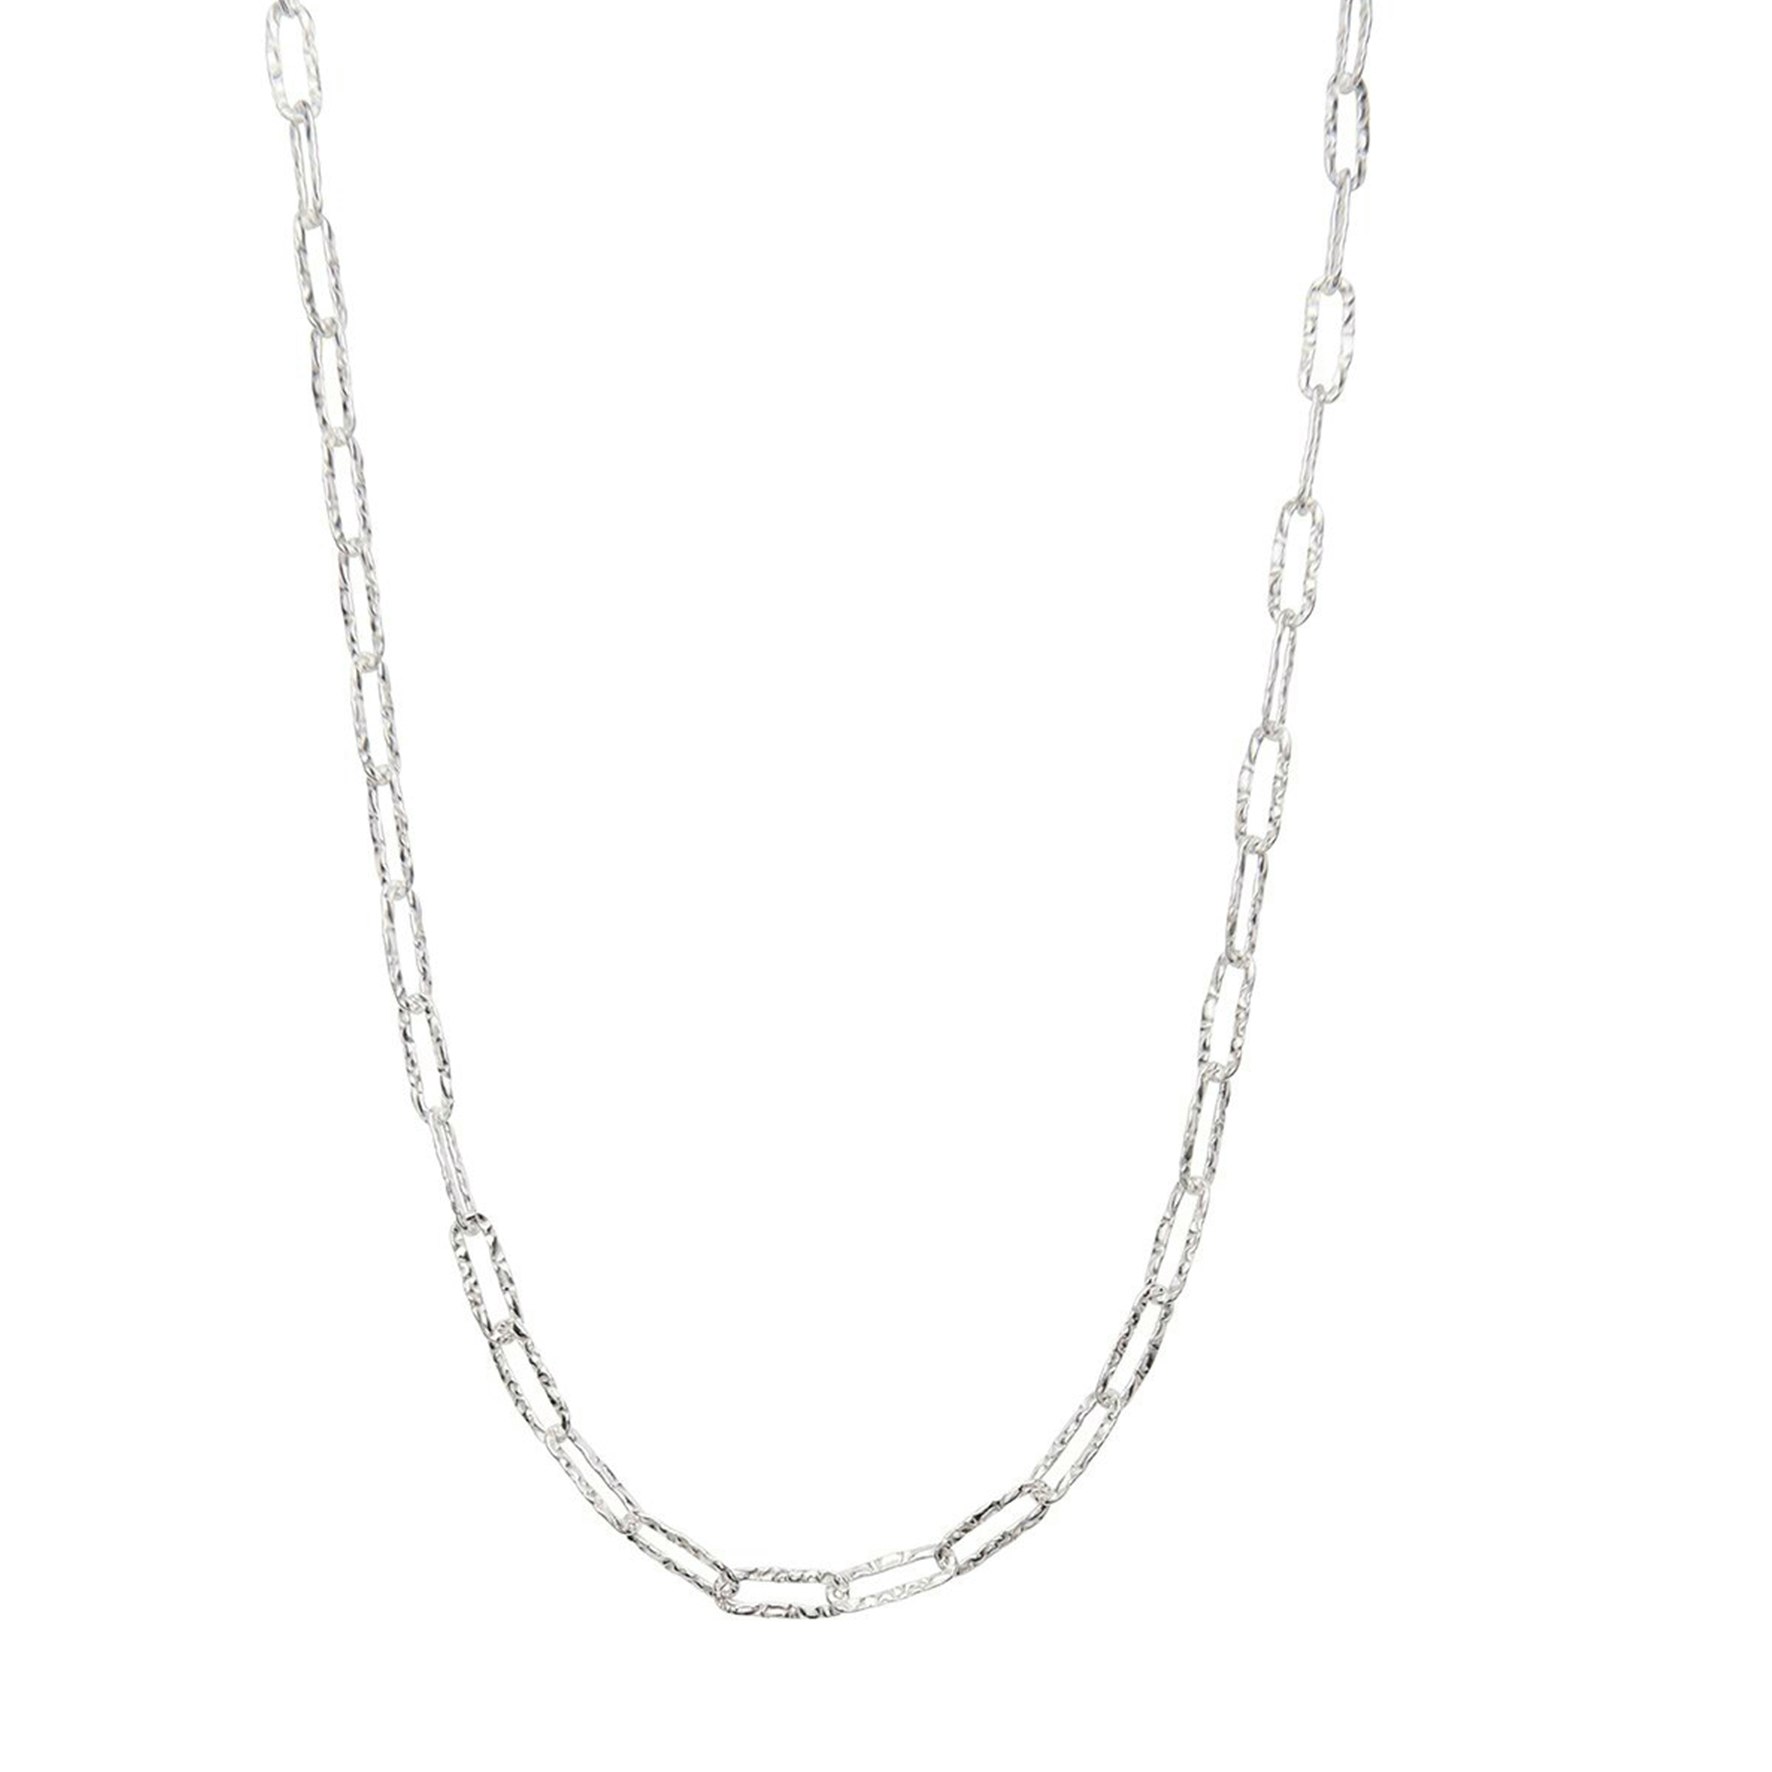 Ginny Necklace from Pico in Silverplated Brass